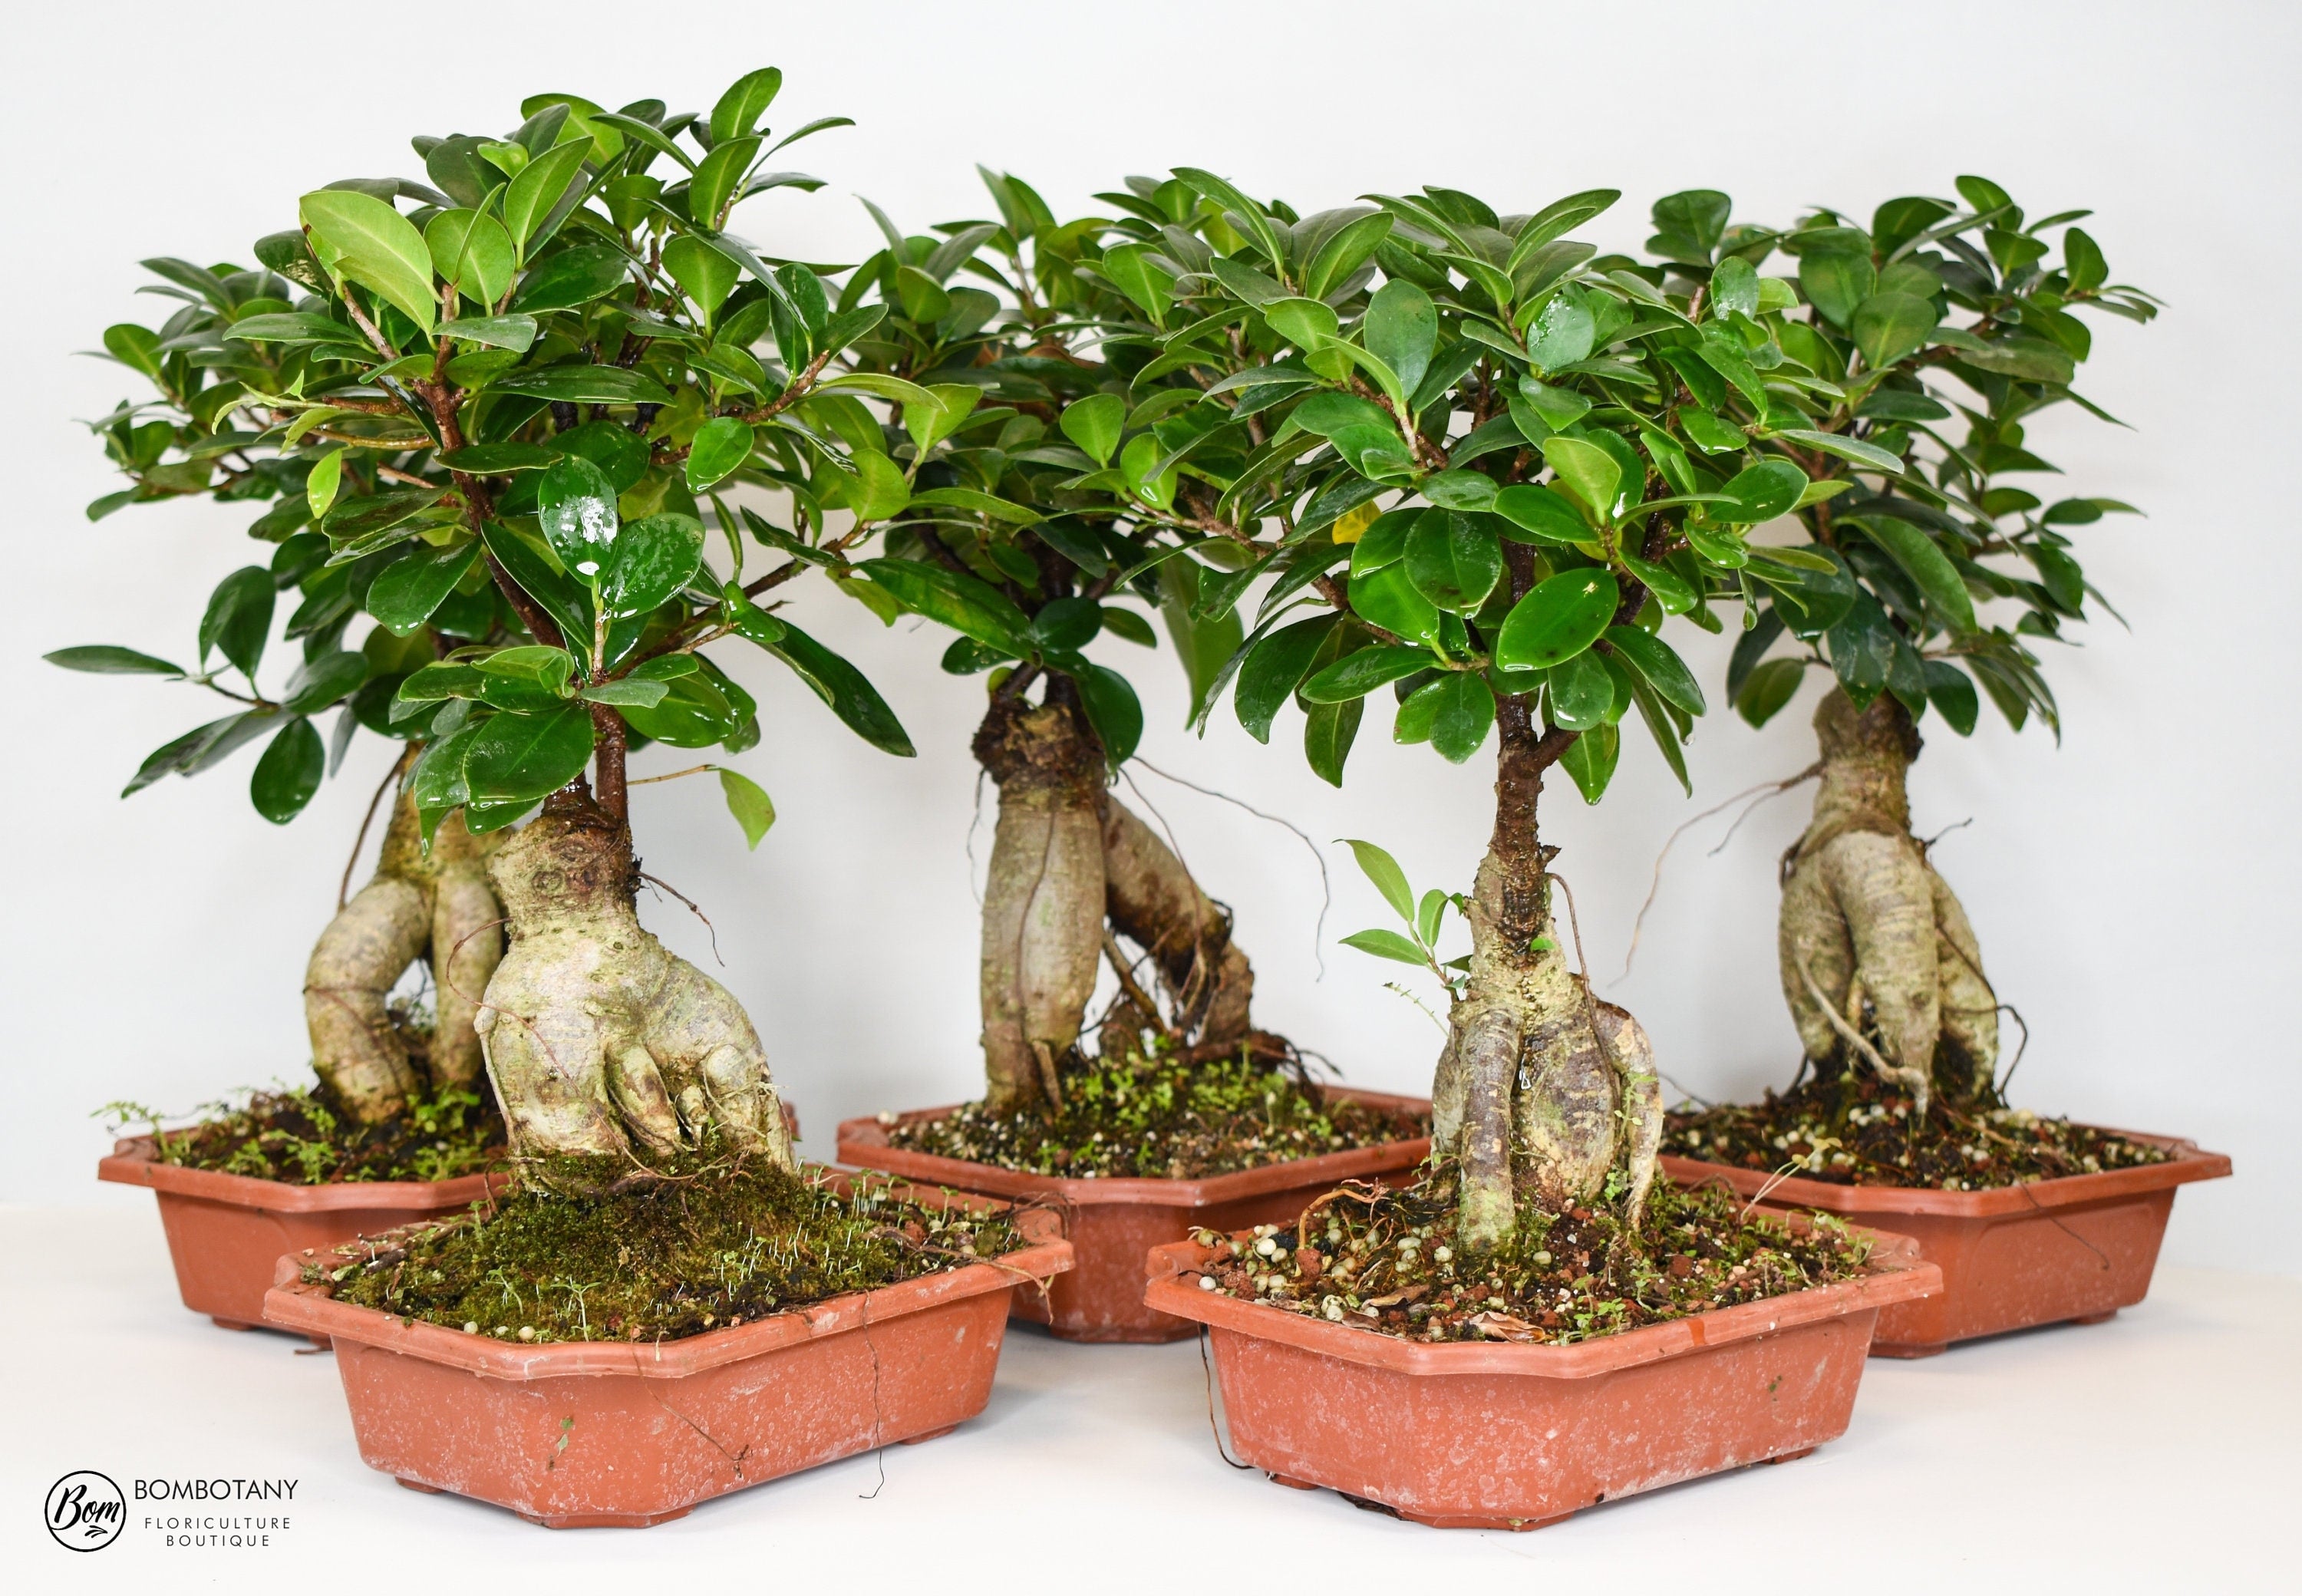 XL Ginseng Ficus Bonsai Plant in bombotany – Pot Traditional 7